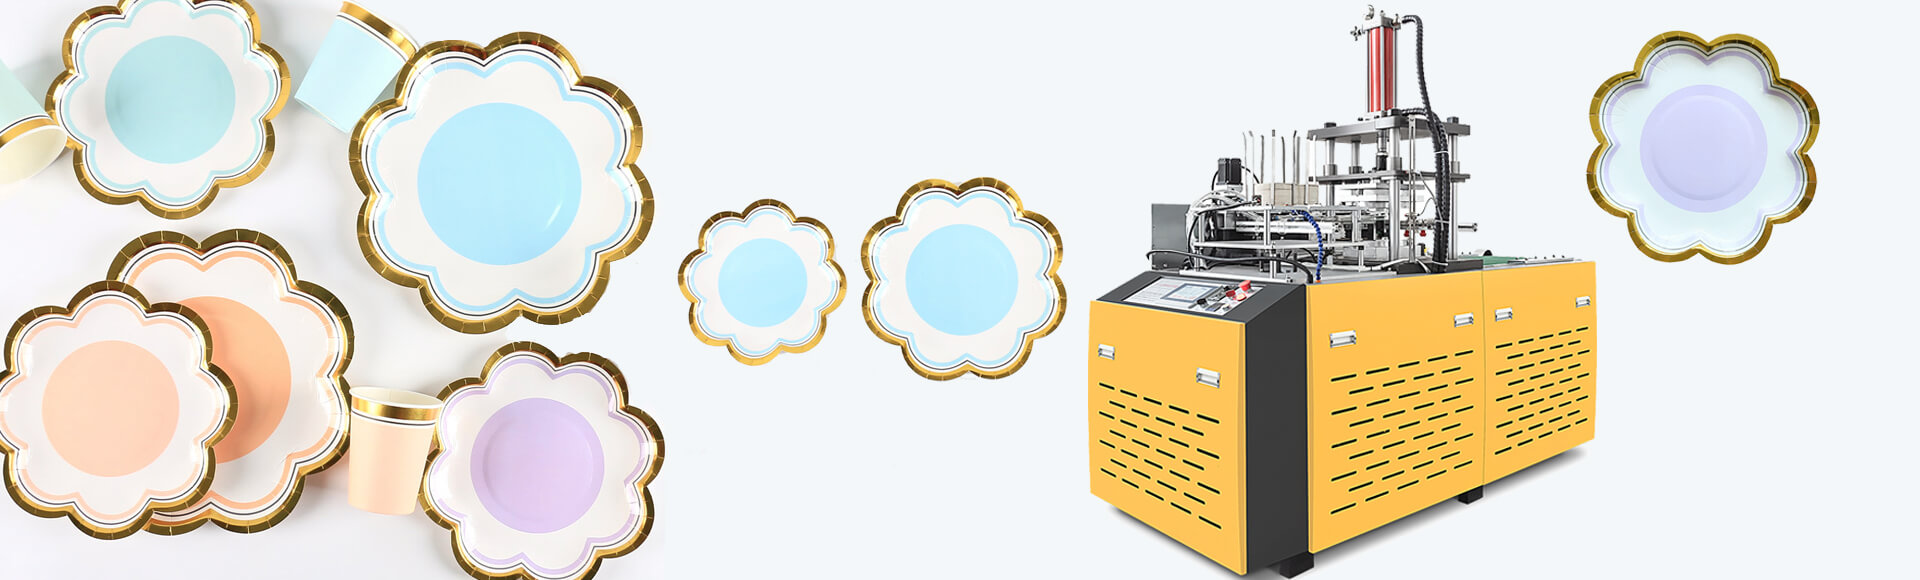 Reliable Paper Plate Machine Manufacturer